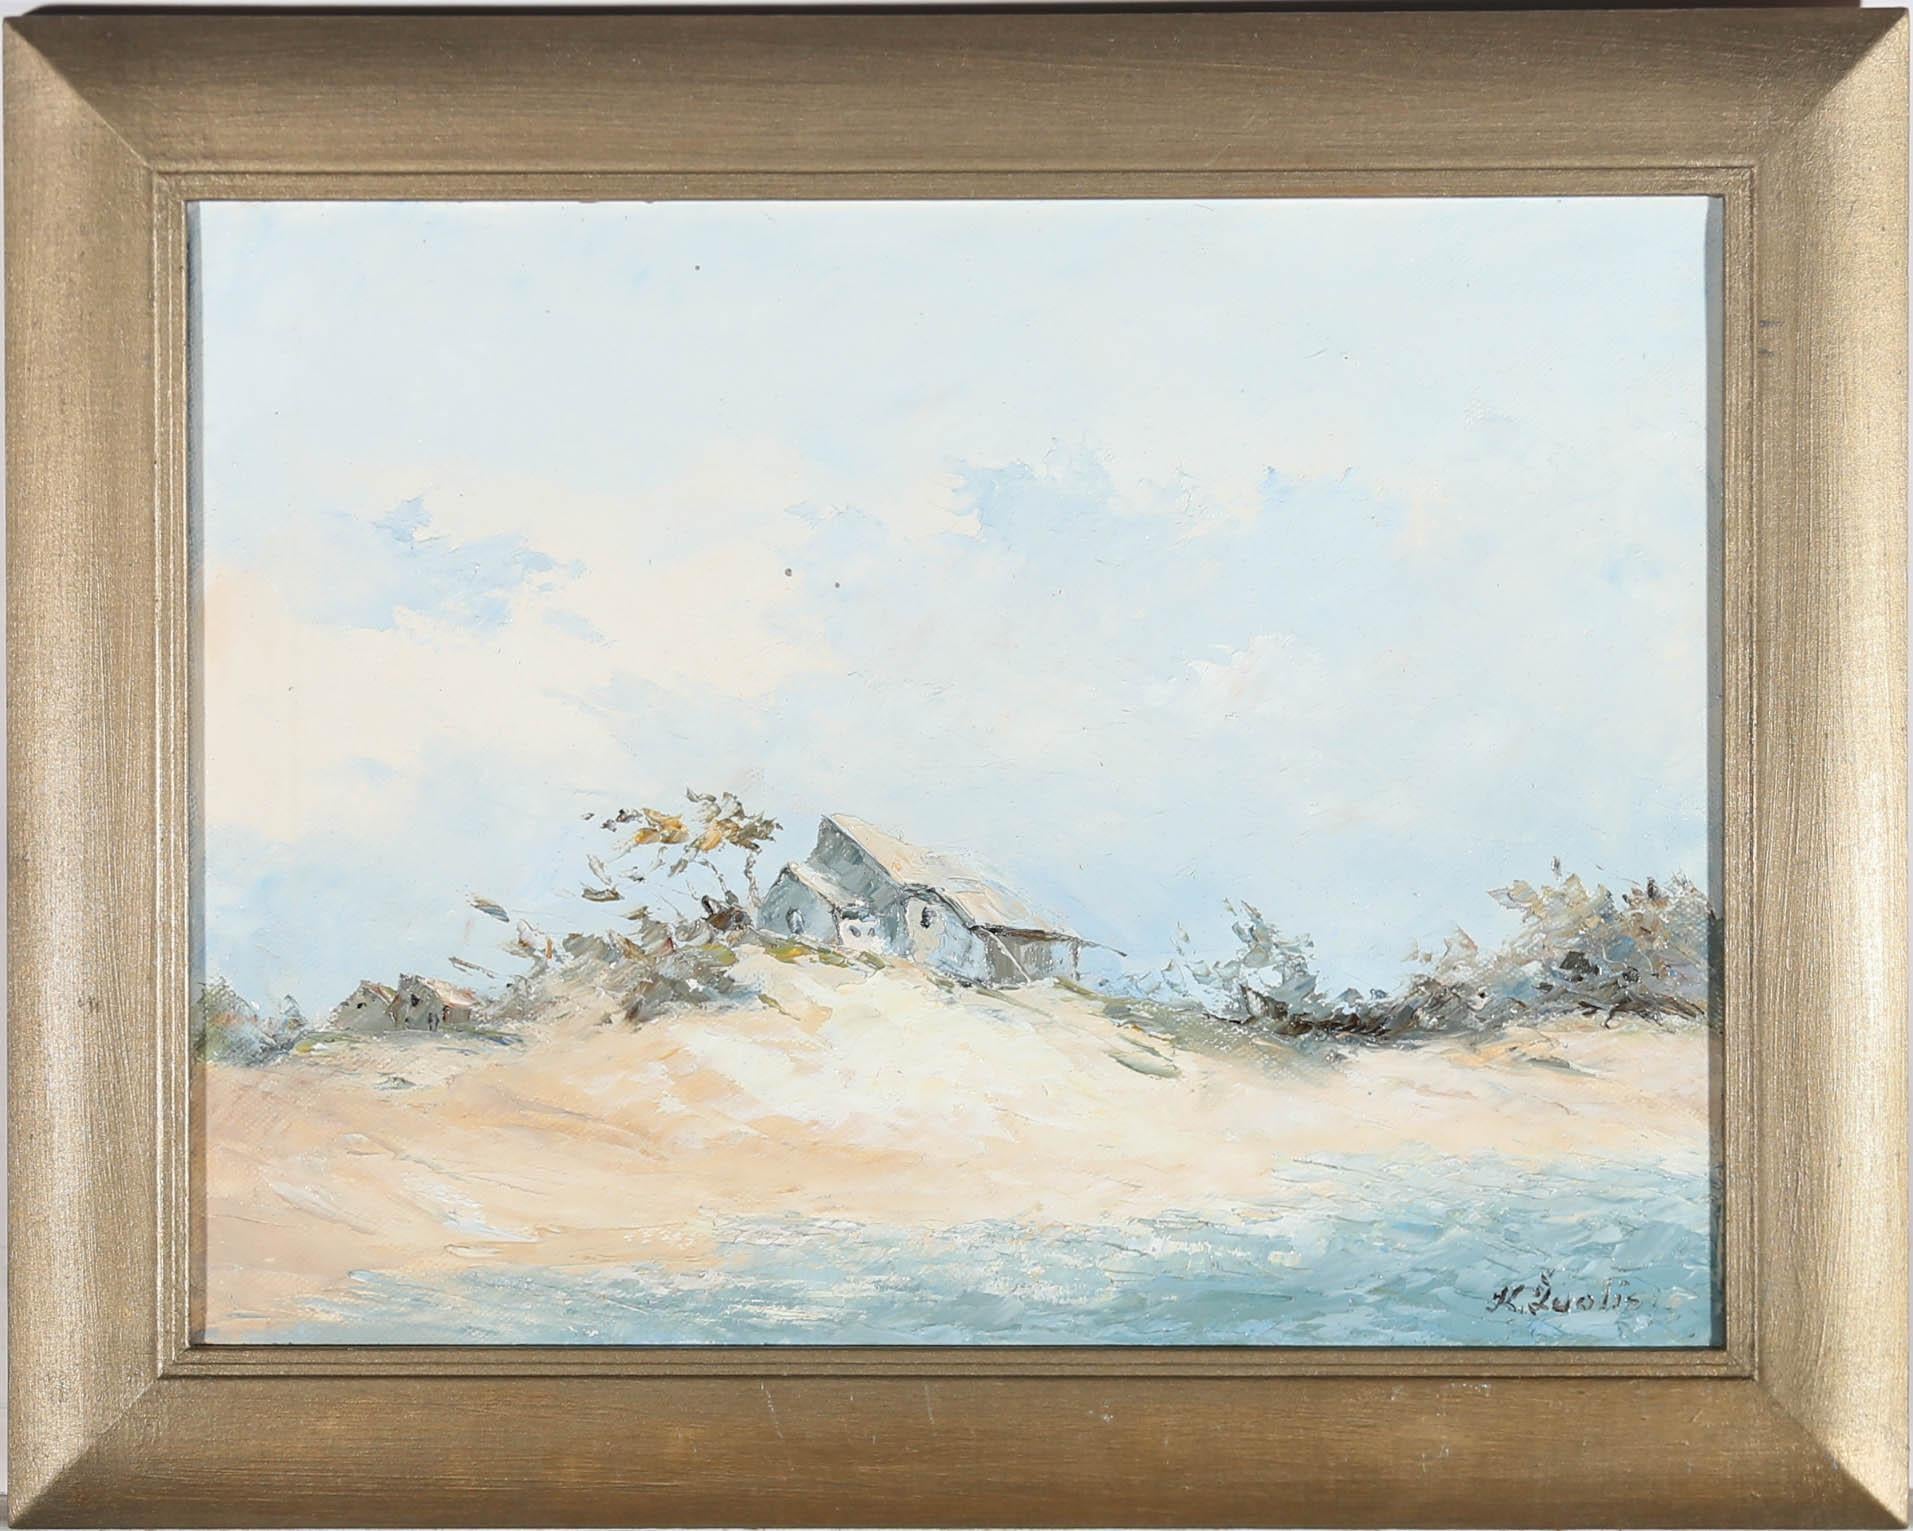 A simplistic and calming beach view with lodges bunkered between breezy trees and sand dunes. Signed to the lower right. Well-presented in a brushed gilt frame. On canvas on stretchers.
